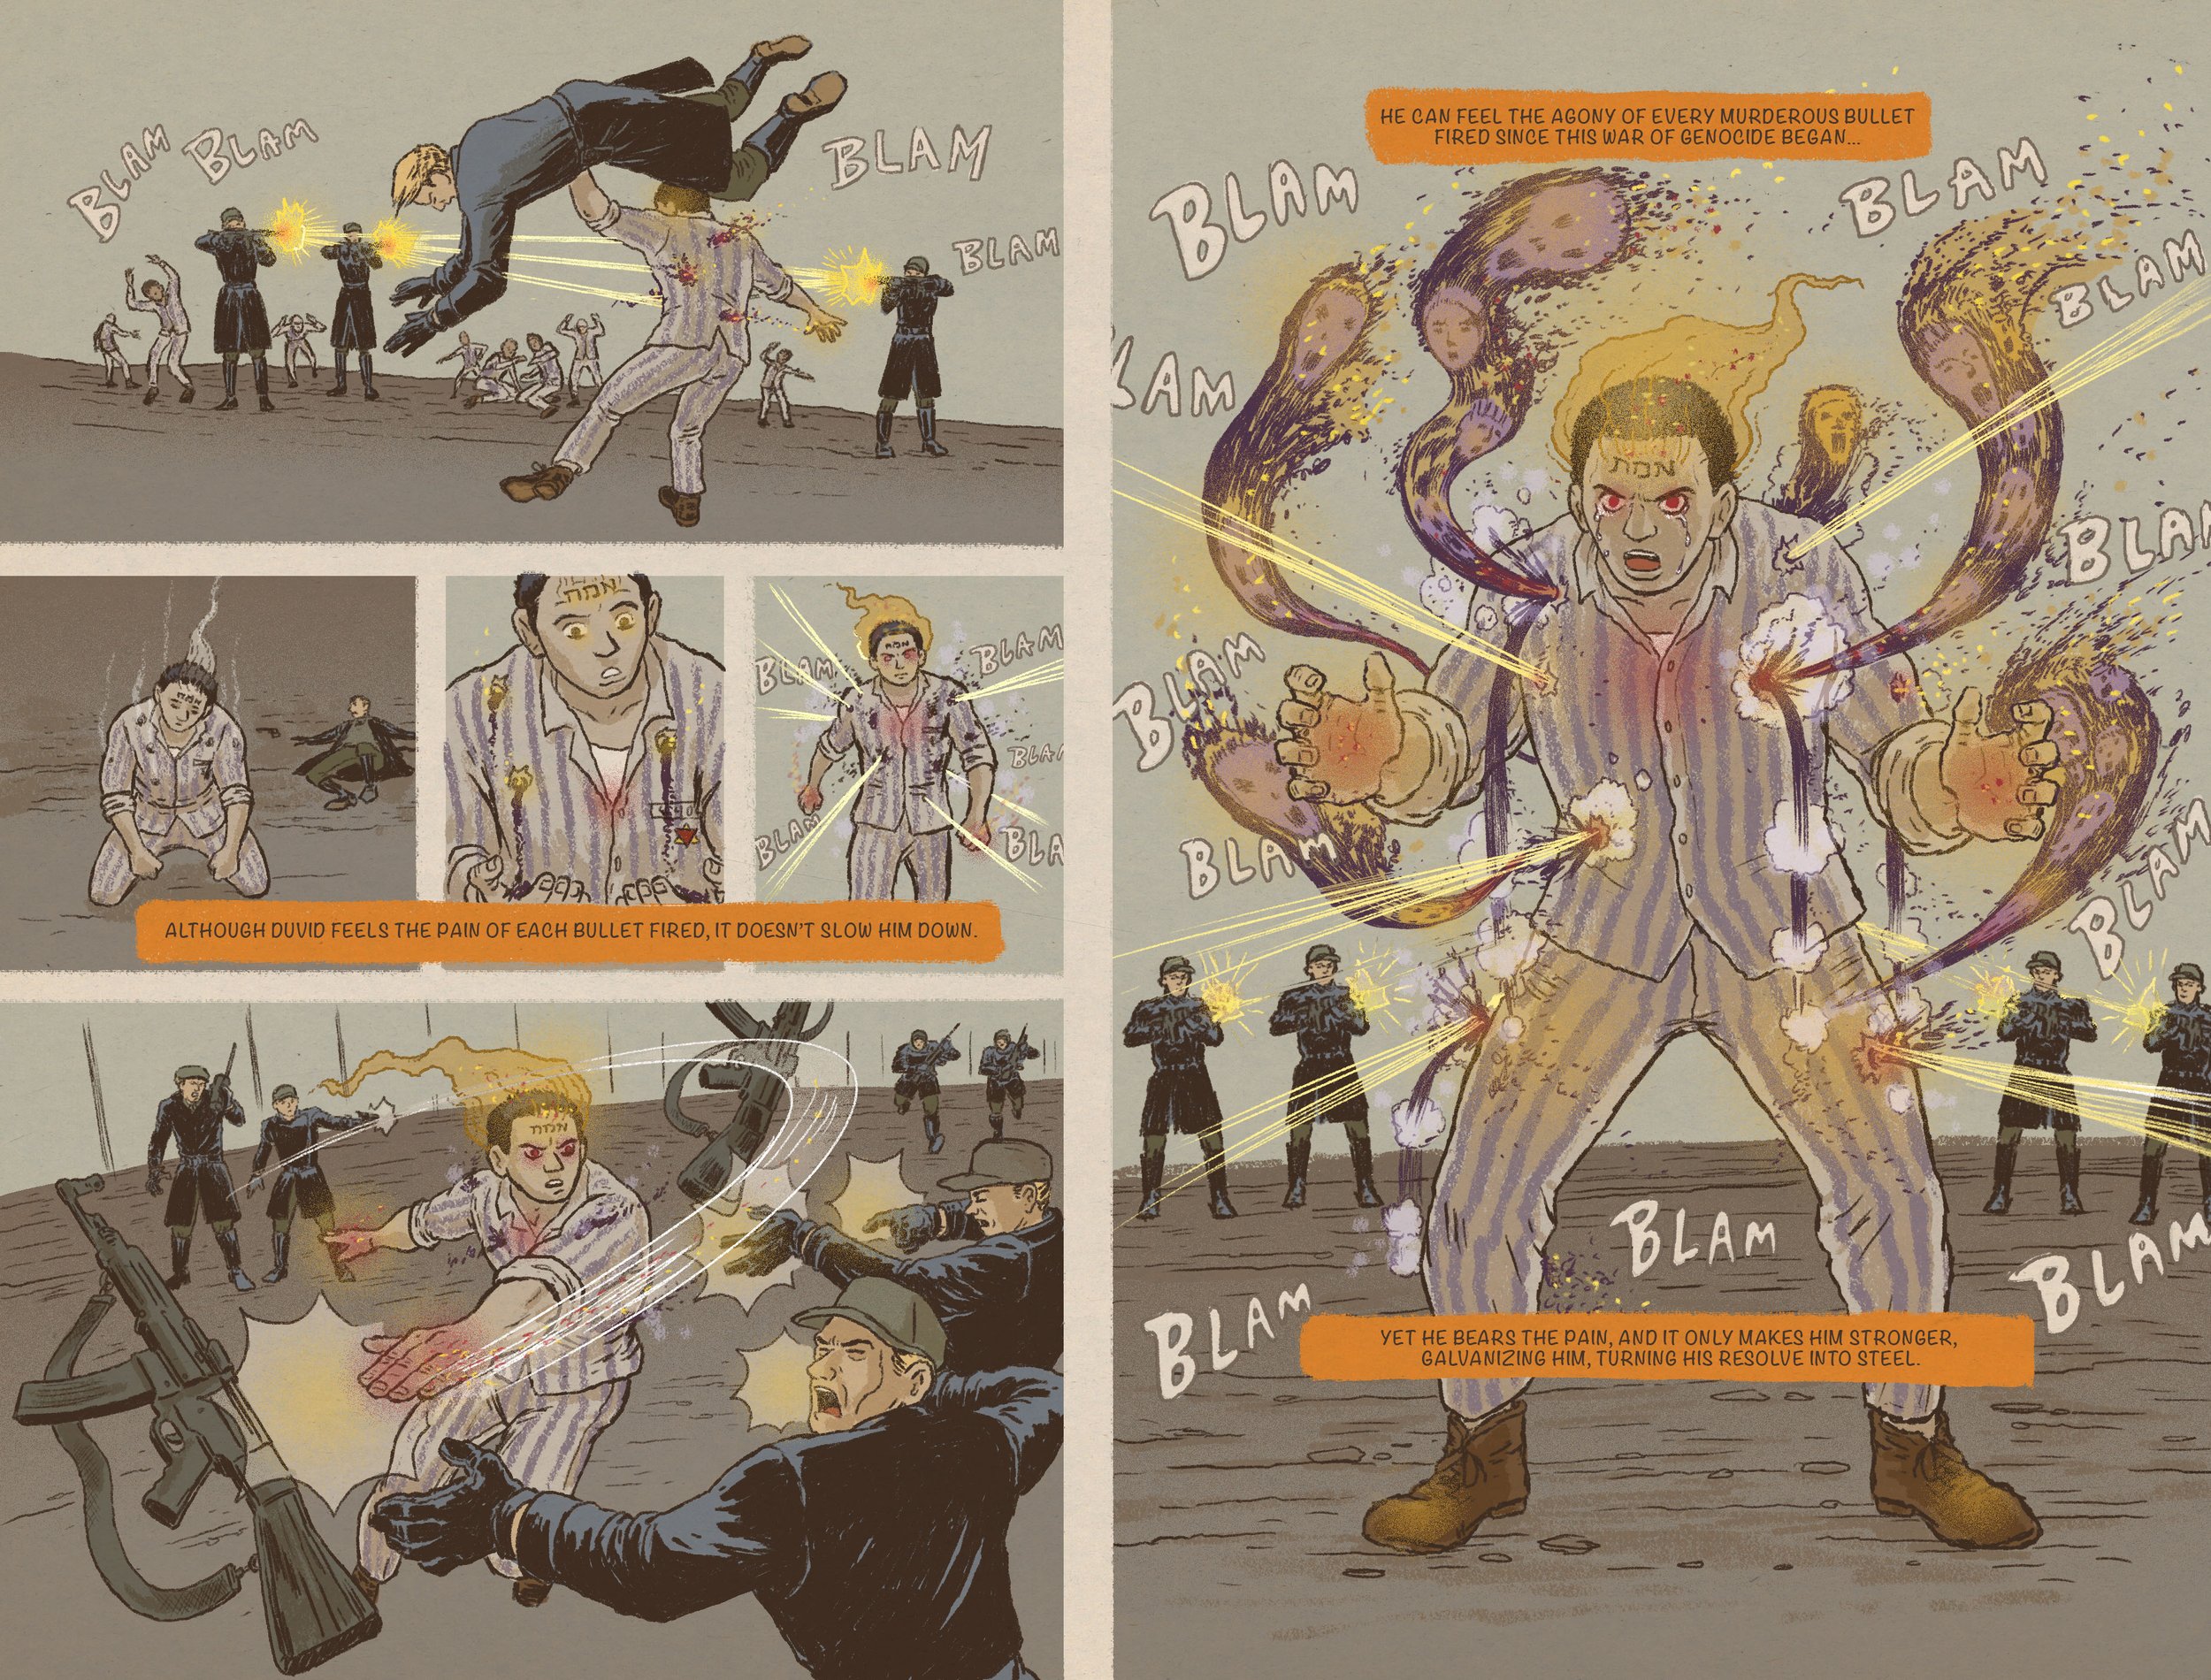 CTD-CH 2-THE GOLEM OF AUSCHWITZ-page 88-89 COLOR.jpg